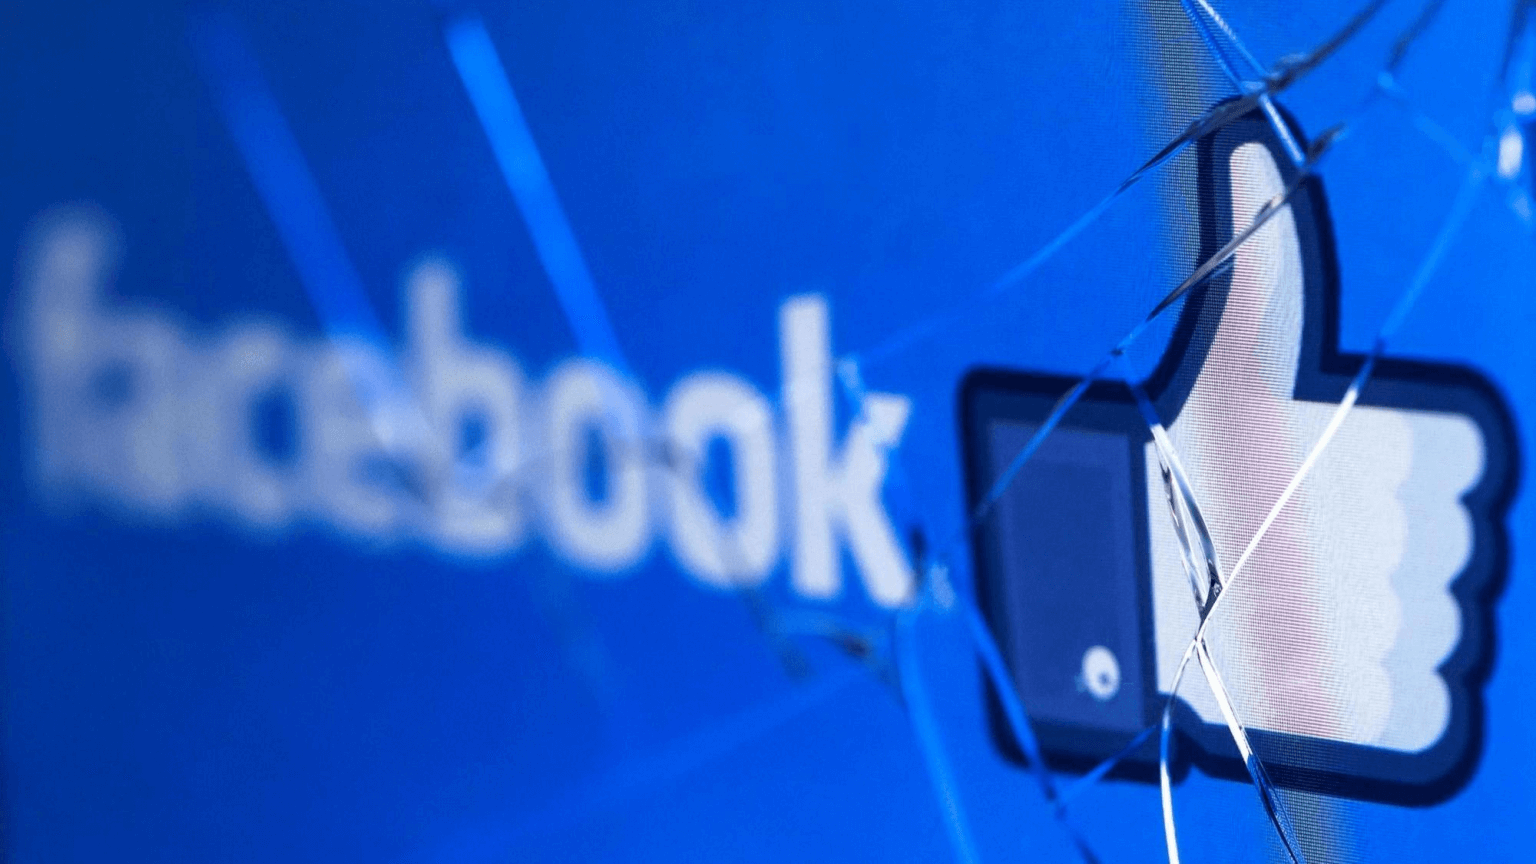 Factbox: How did Facebook go down?